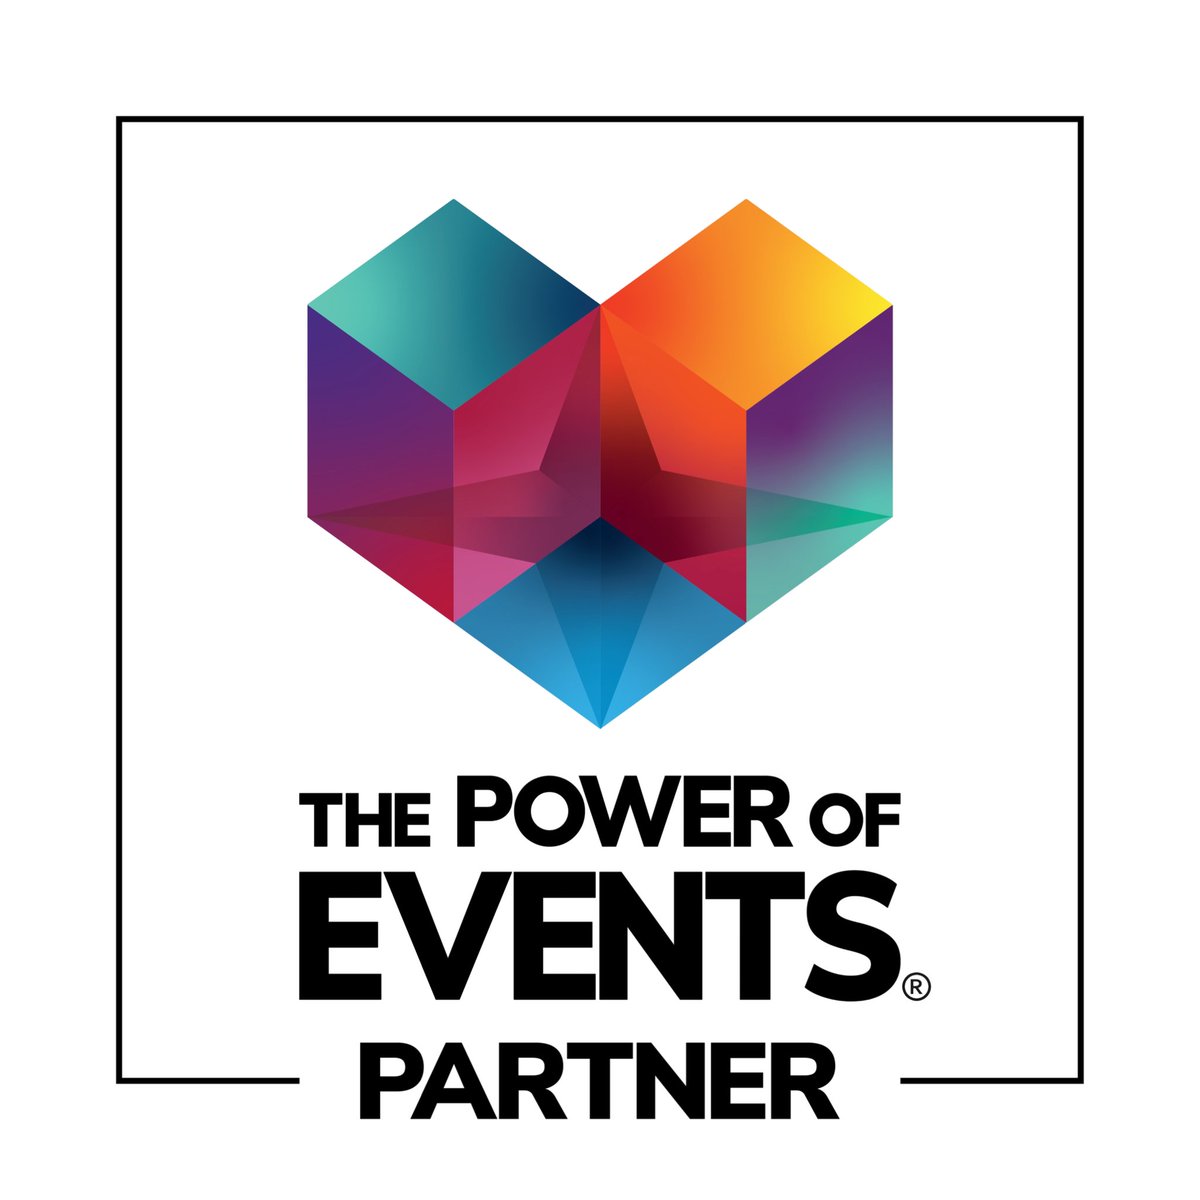 Proud partners of @power_of_events  
💫  * Launch Tomorrow * 💫 
💫*Splash page at thepowerofevents.org * 💫

#eventprofs #thepowerofevents #eventsUK